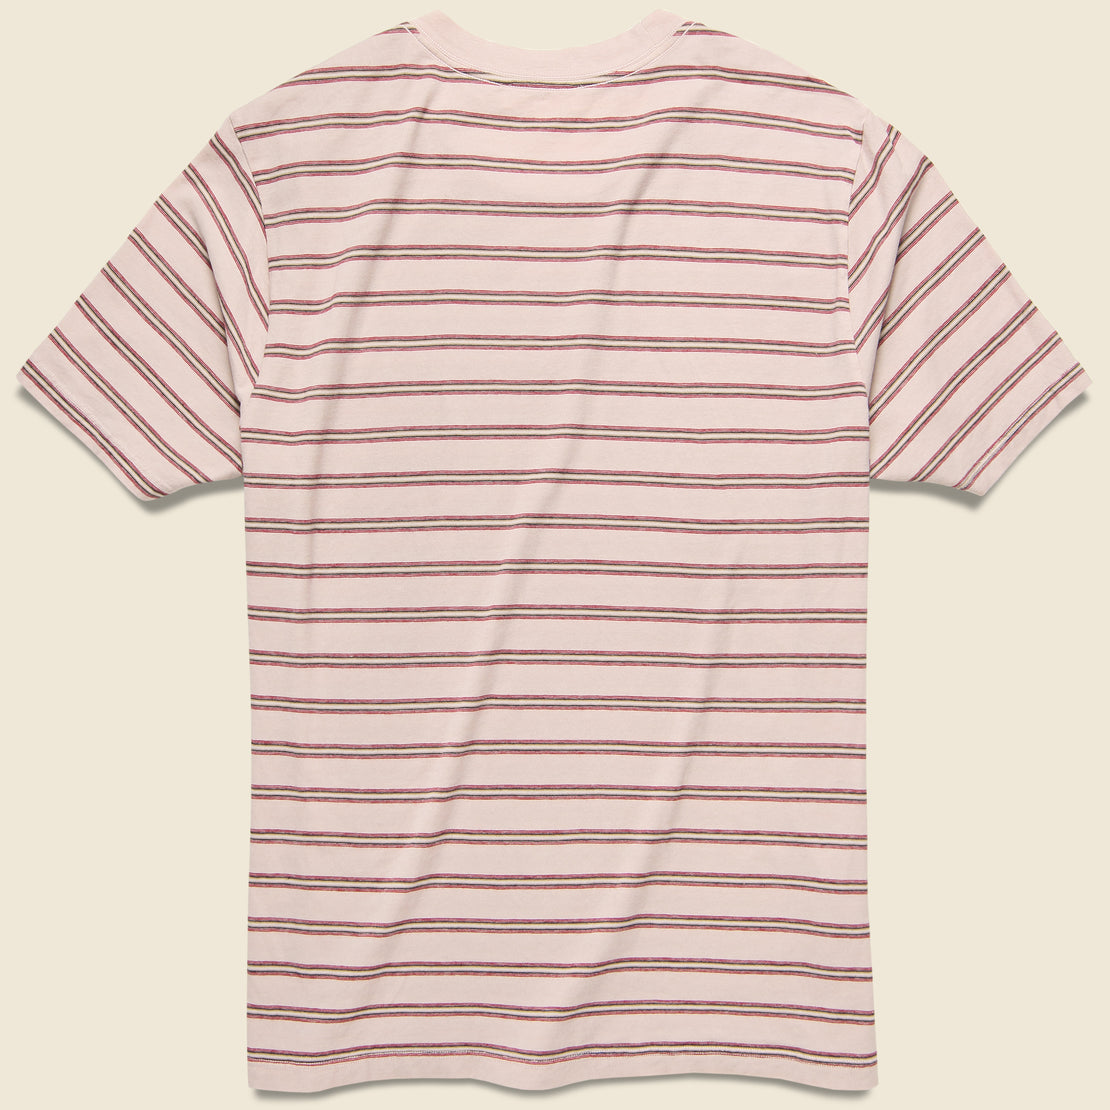 Vintage Striped Relaxed Tee - Tea - Save Khaki - STAG Provisions - Tops - S/S Tee